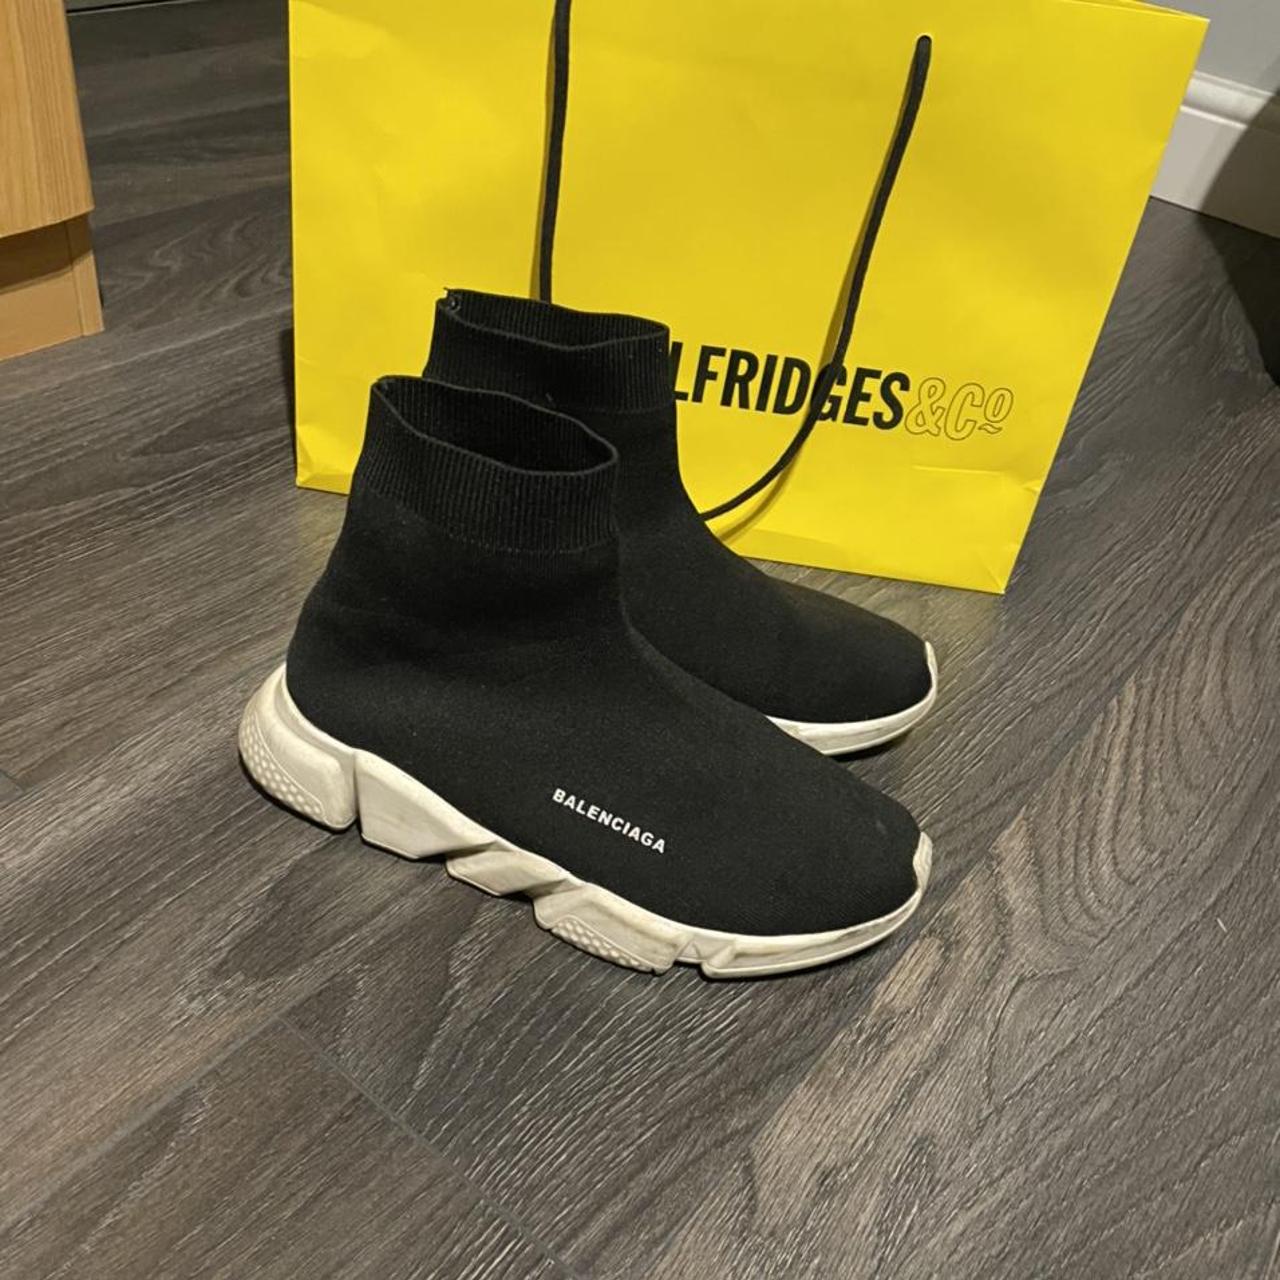 Balenciaga Runners - black and white with white... - Depop